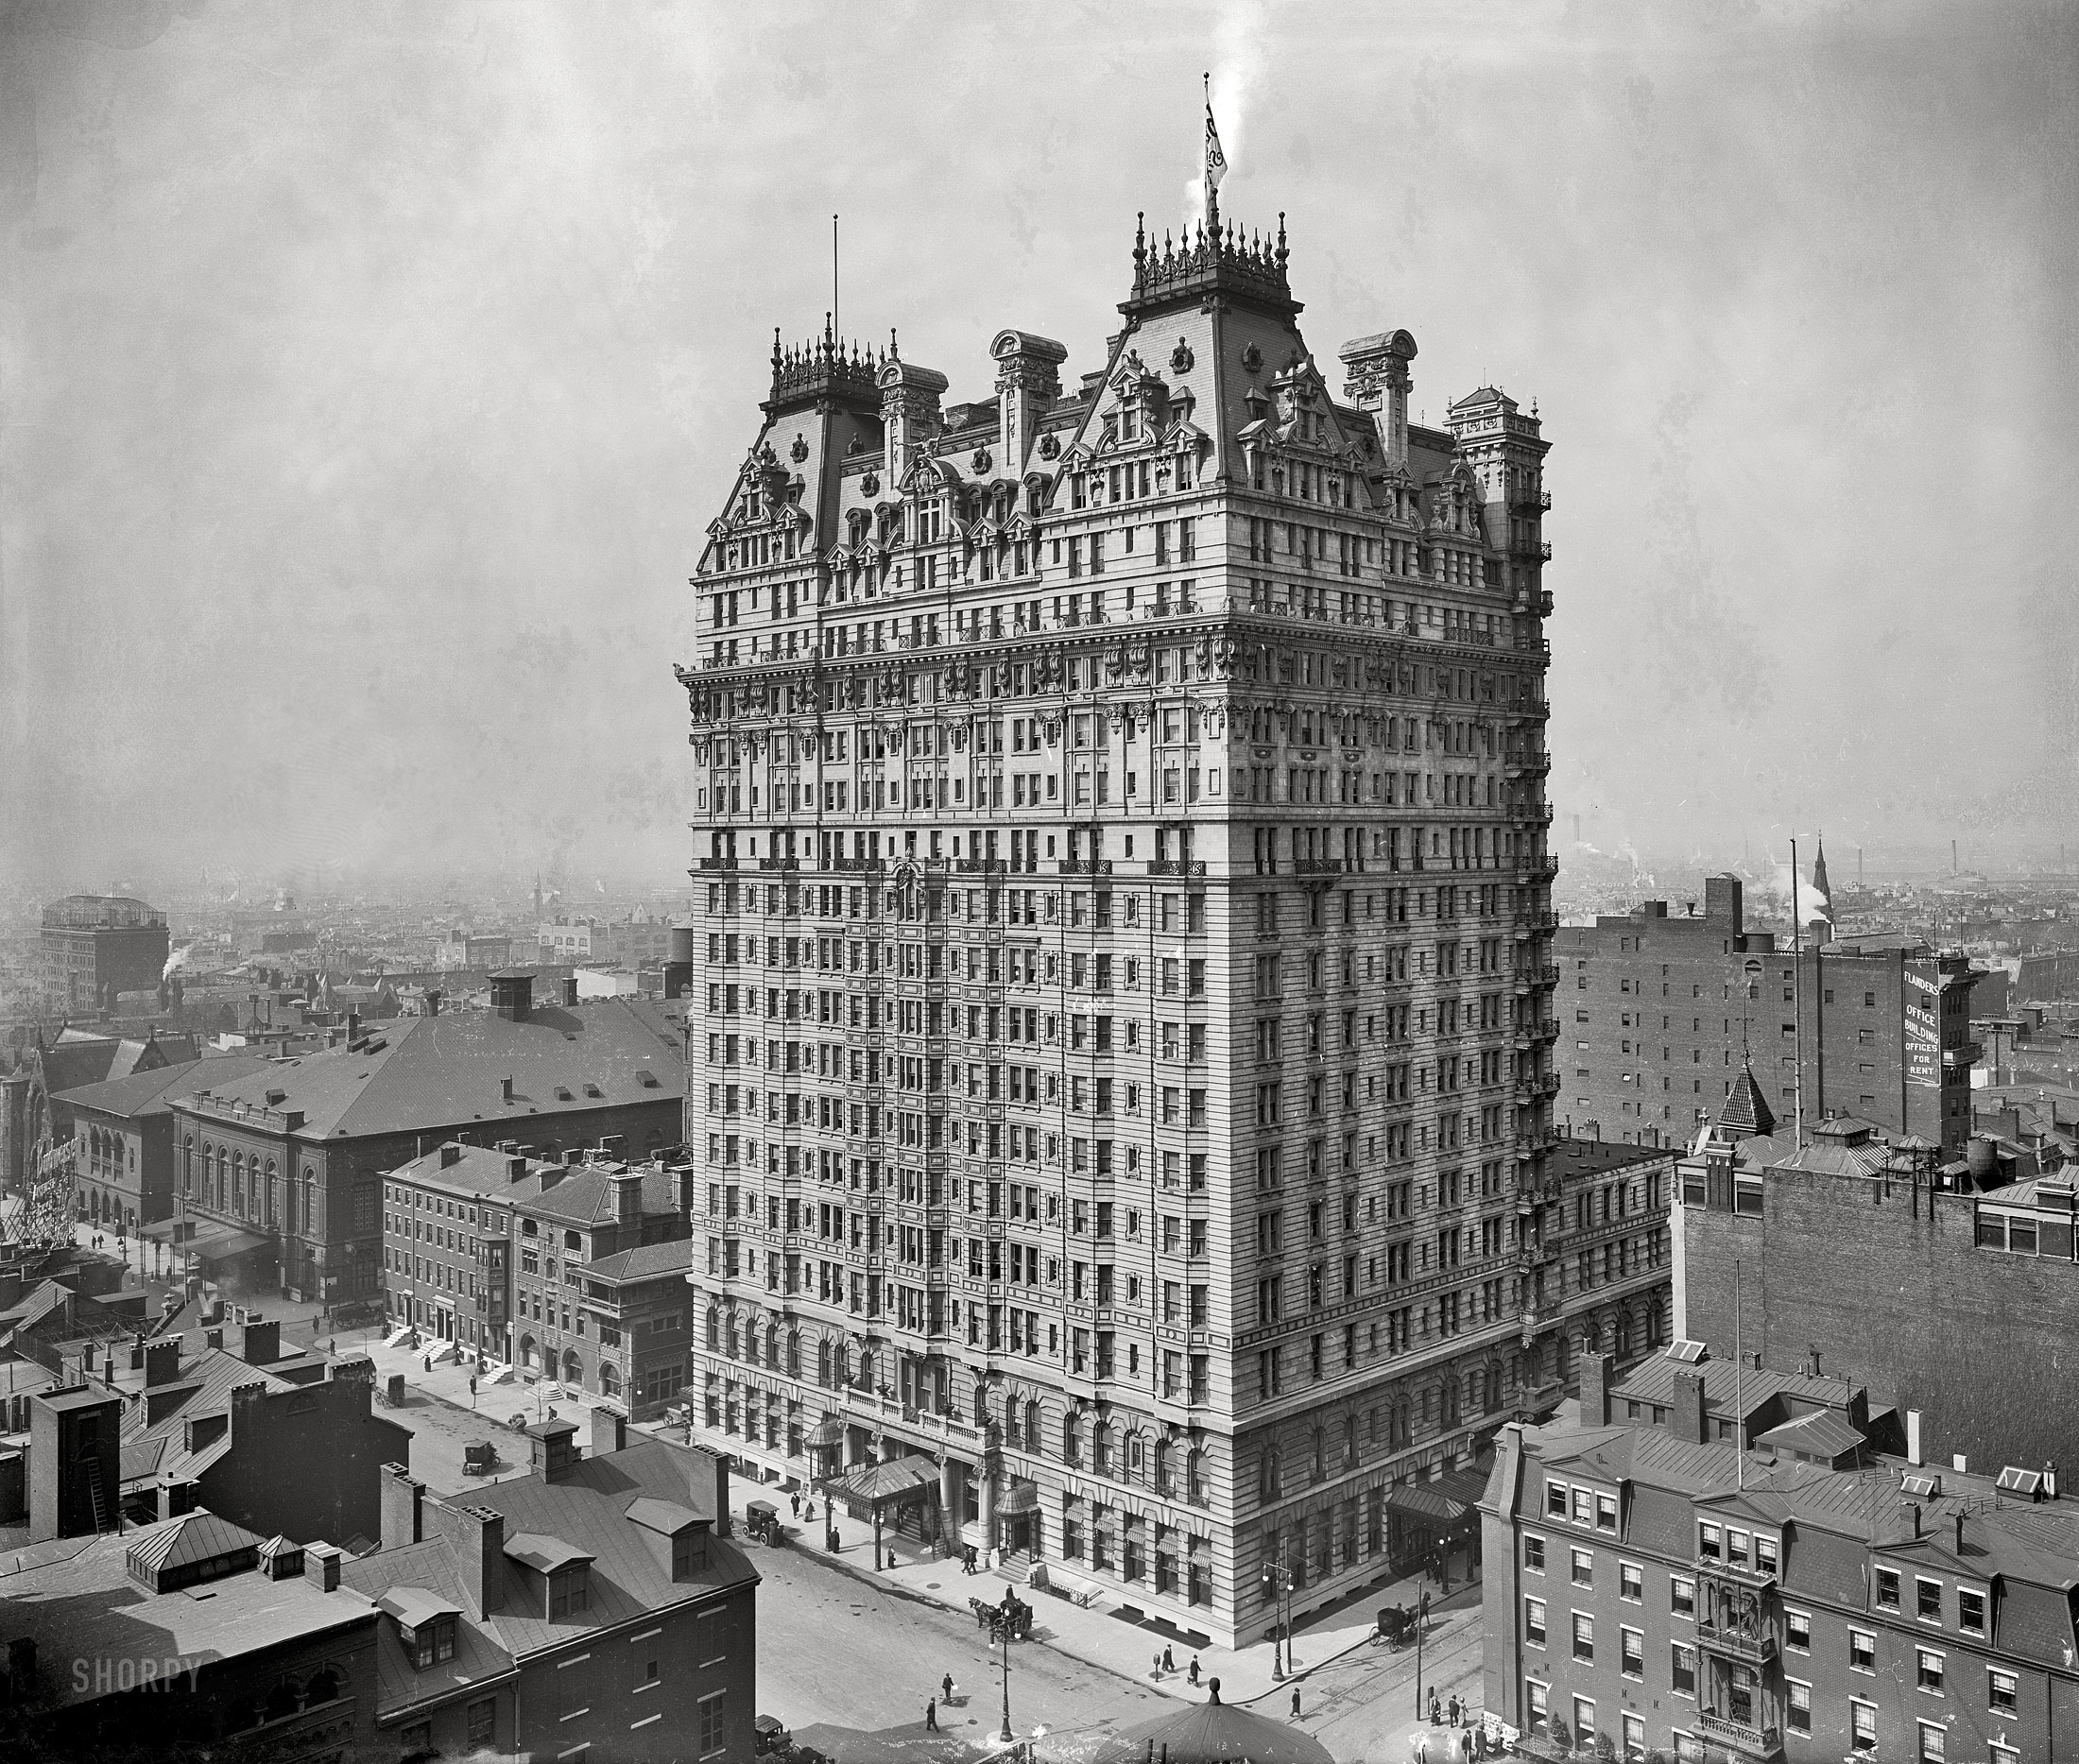 Sooty Philadelphia circa 1910. "The Bellevue-Stratford Hotel." 8x10 inch dry plate glass negative, Detroit Publishing Company. View full size.